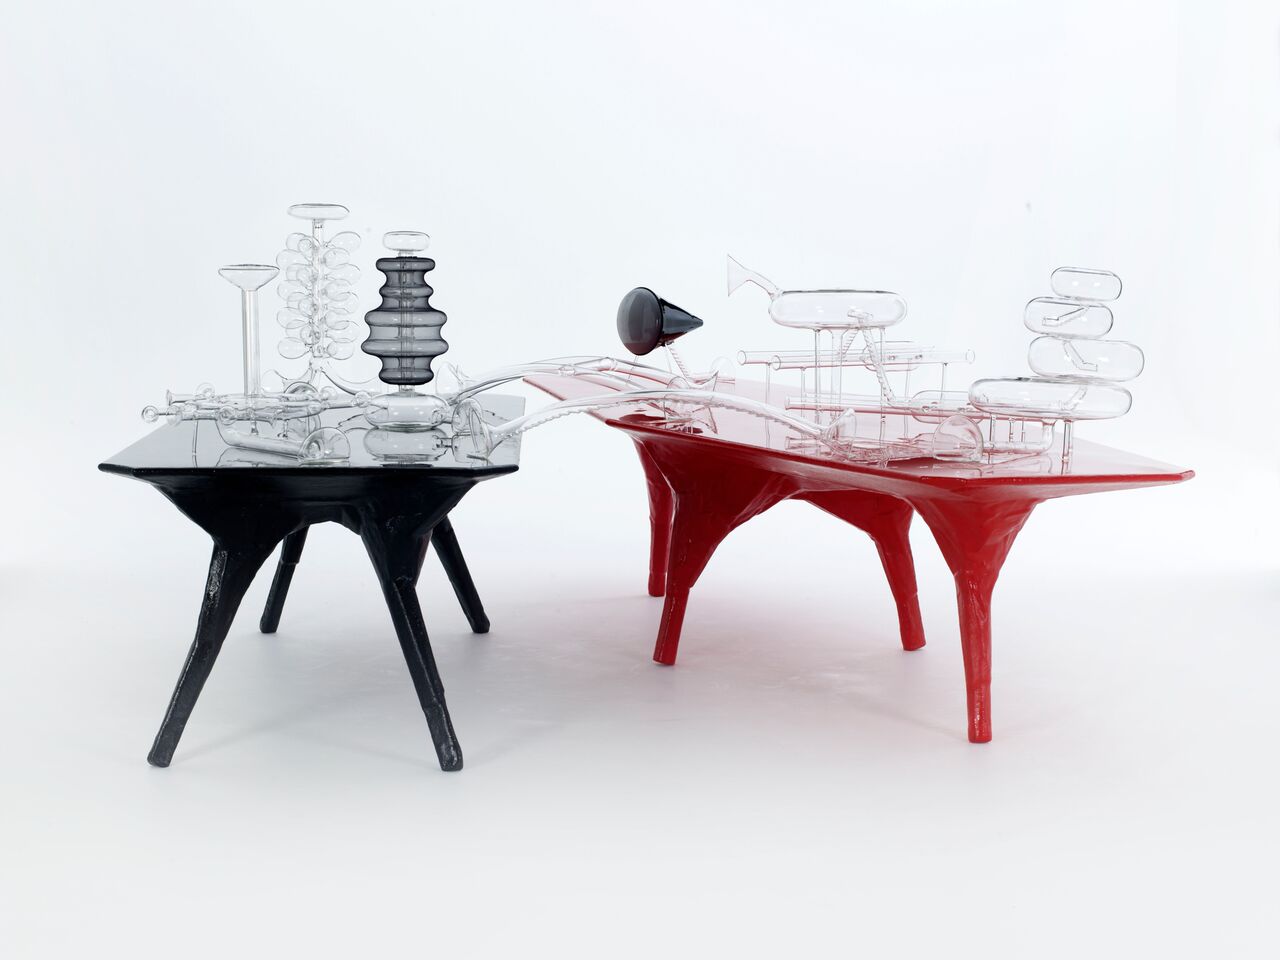 El Ultimo Grito<br><i>Free Range</i> (tables)<br><i>Imaginary Architectures</i> (glass) <br>2011<br> Commissioned and exhibited at Spring Projects, London